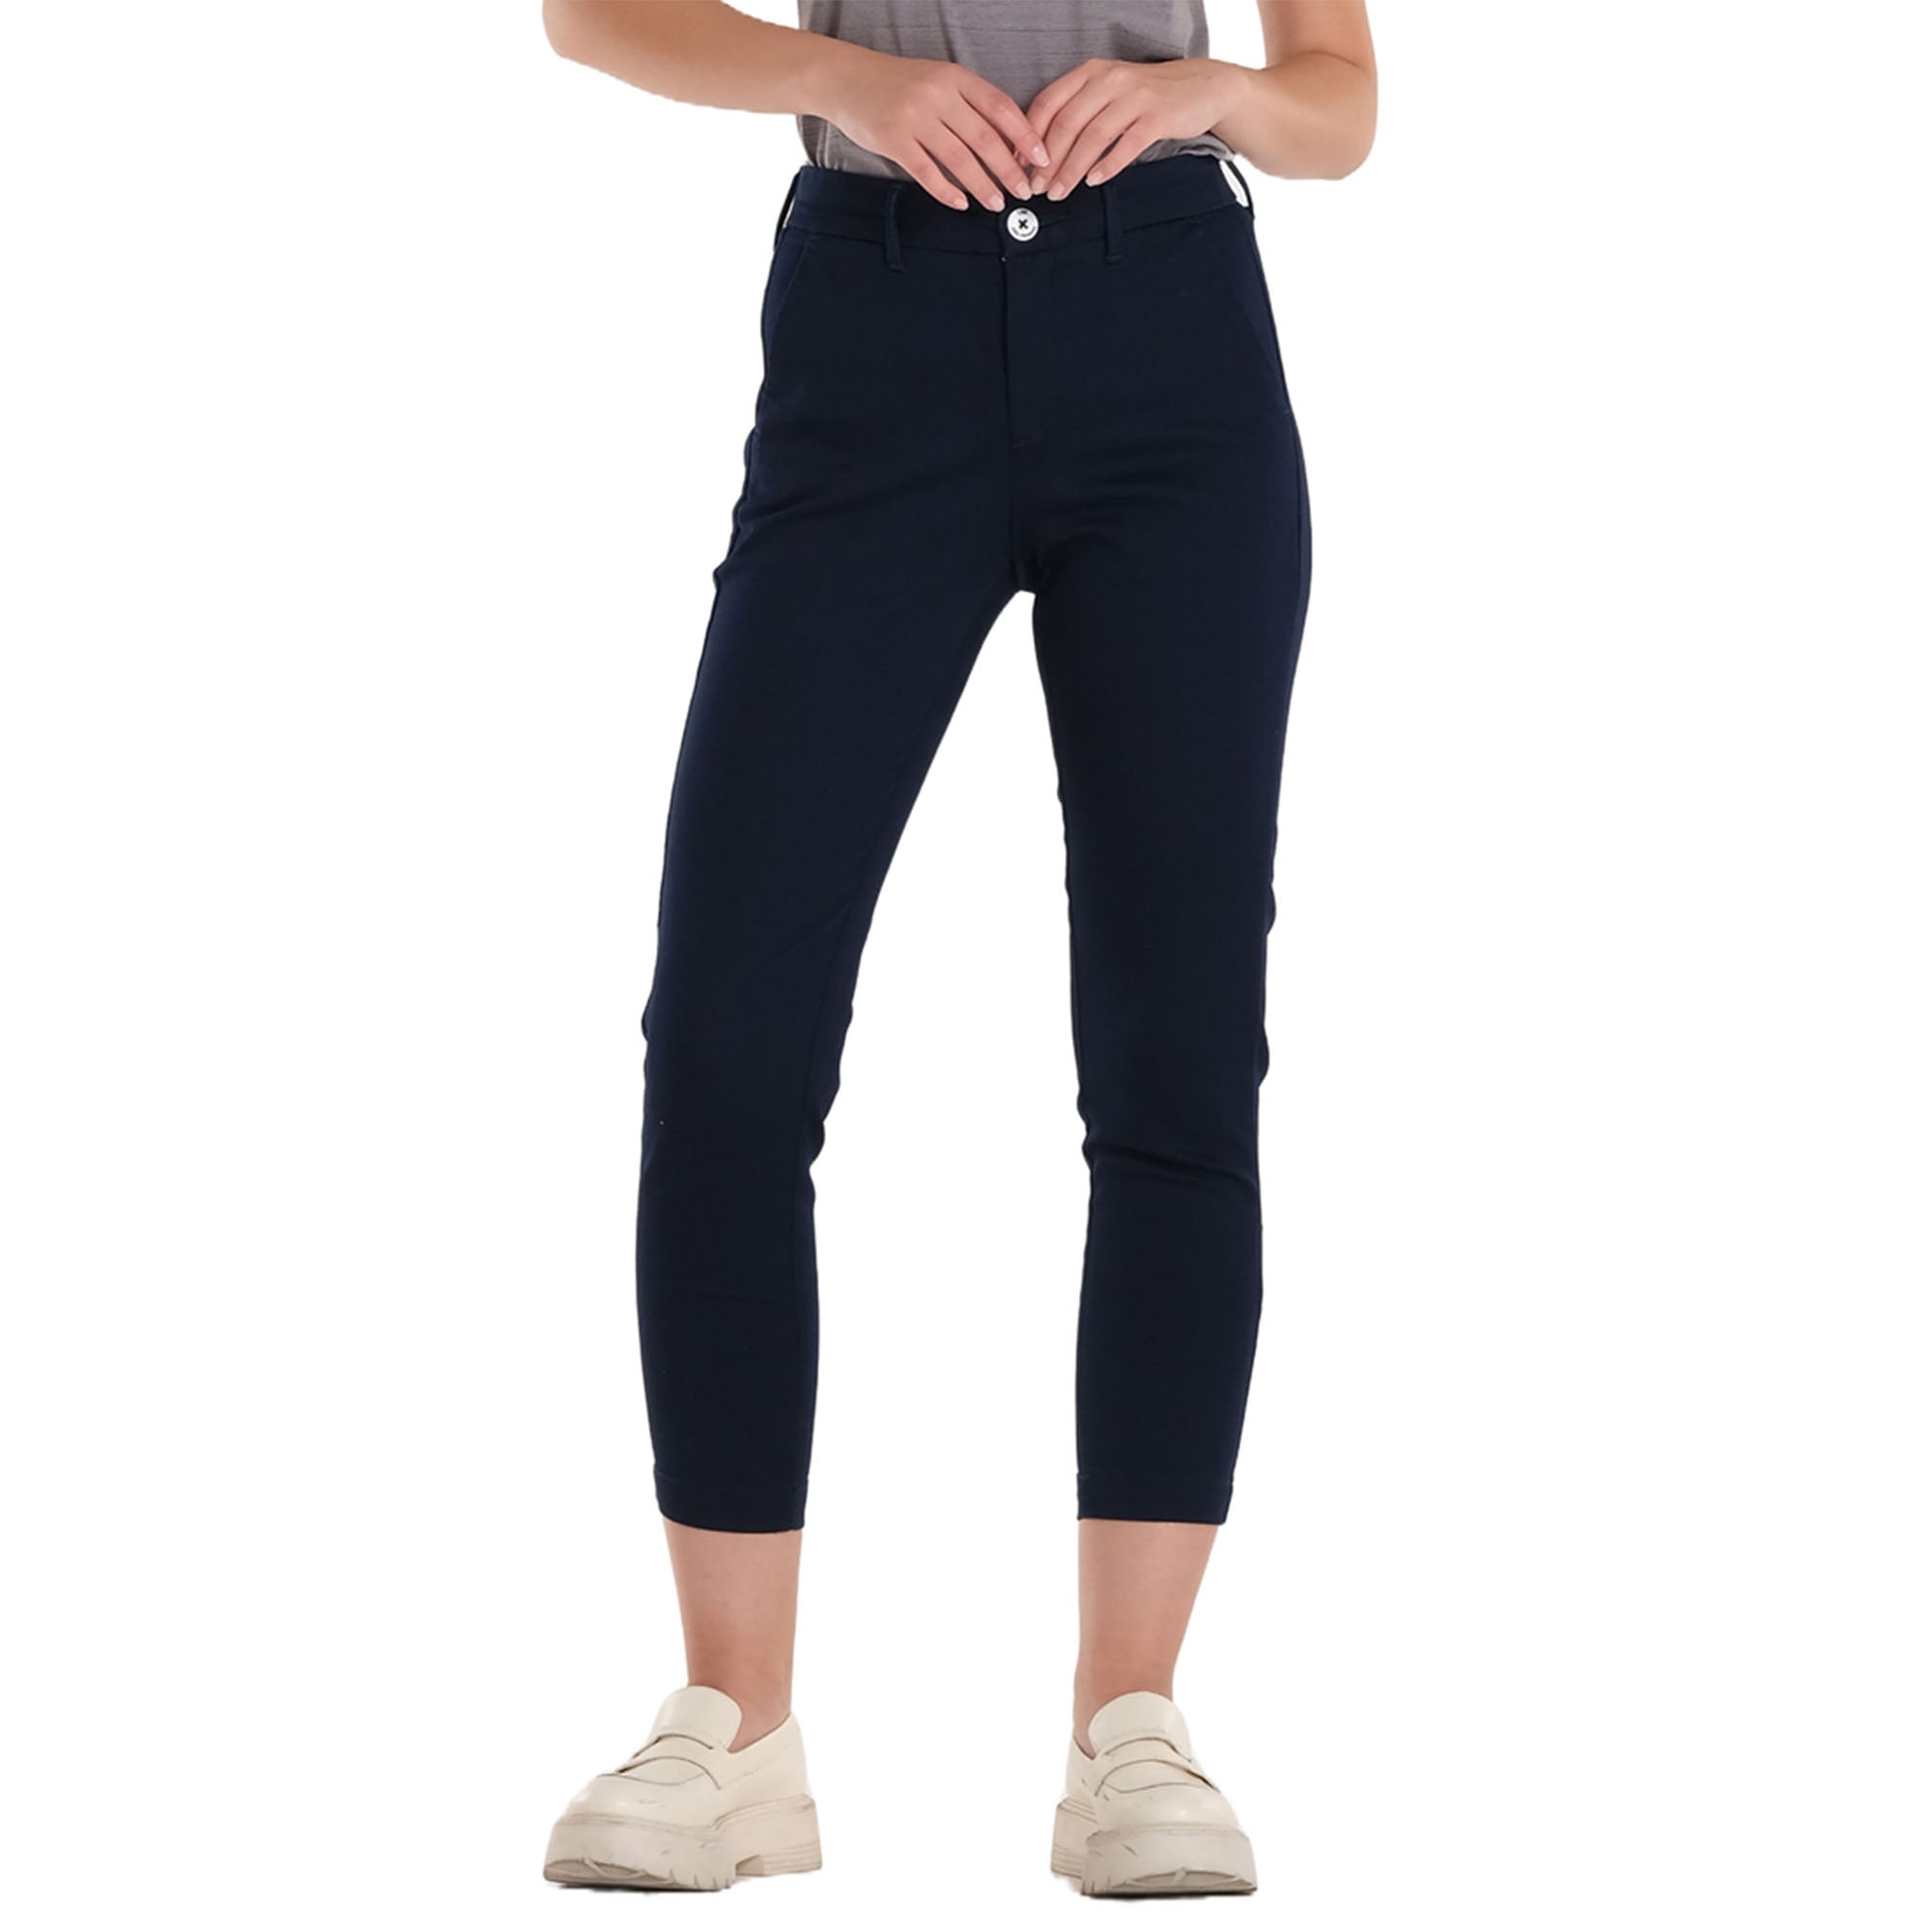 Lee Jeans Womens Relaxed Fit Plain Front Straight Leg Pant Stretch  Variation NEW | eBay